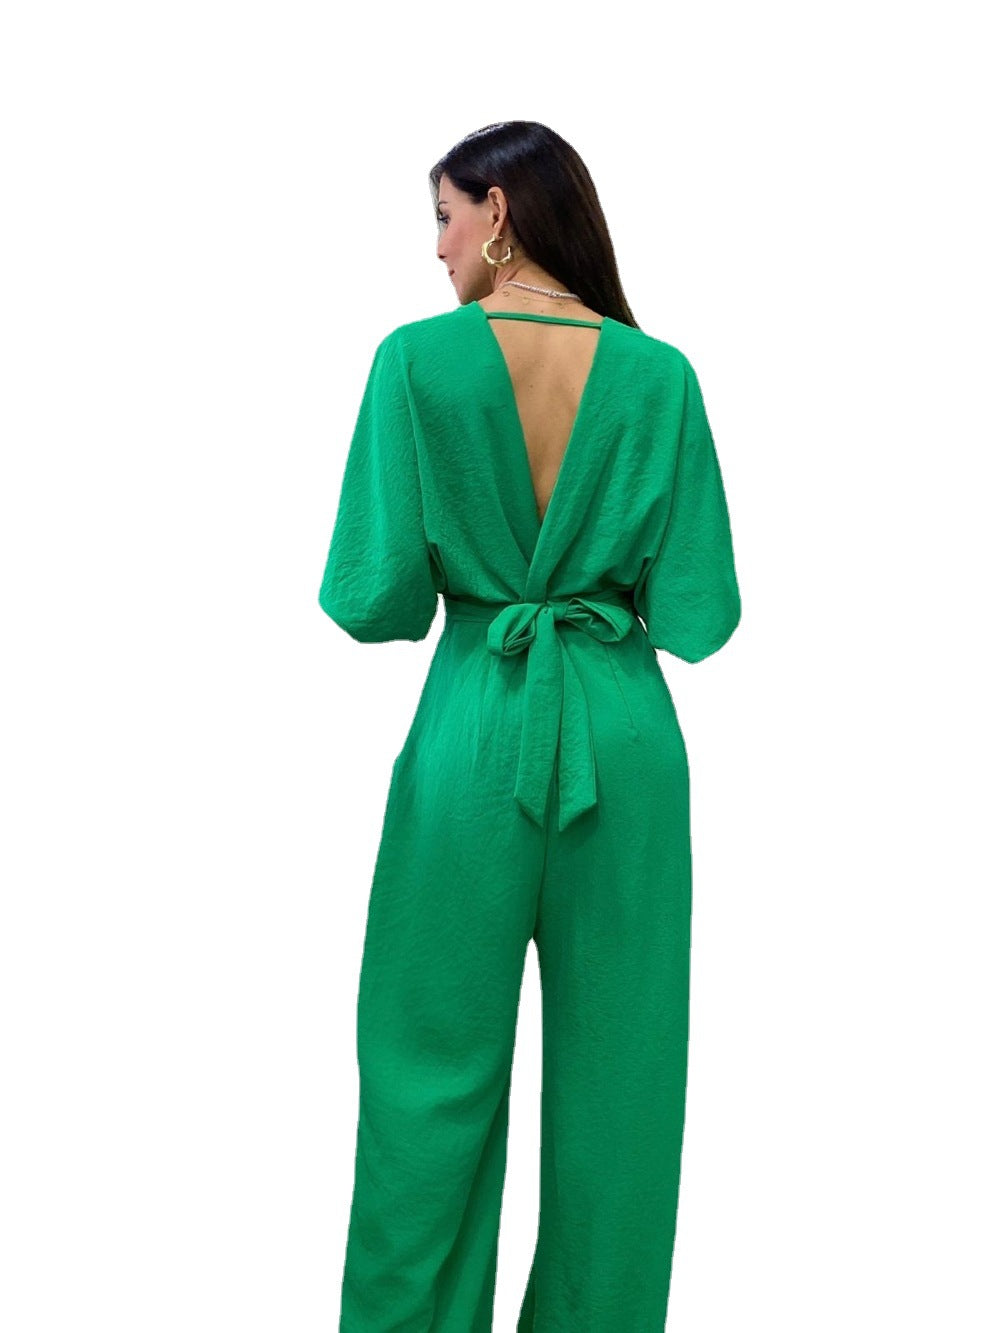 Women's Summer Batwing Sleeve Backless Trousers Elegant Suits